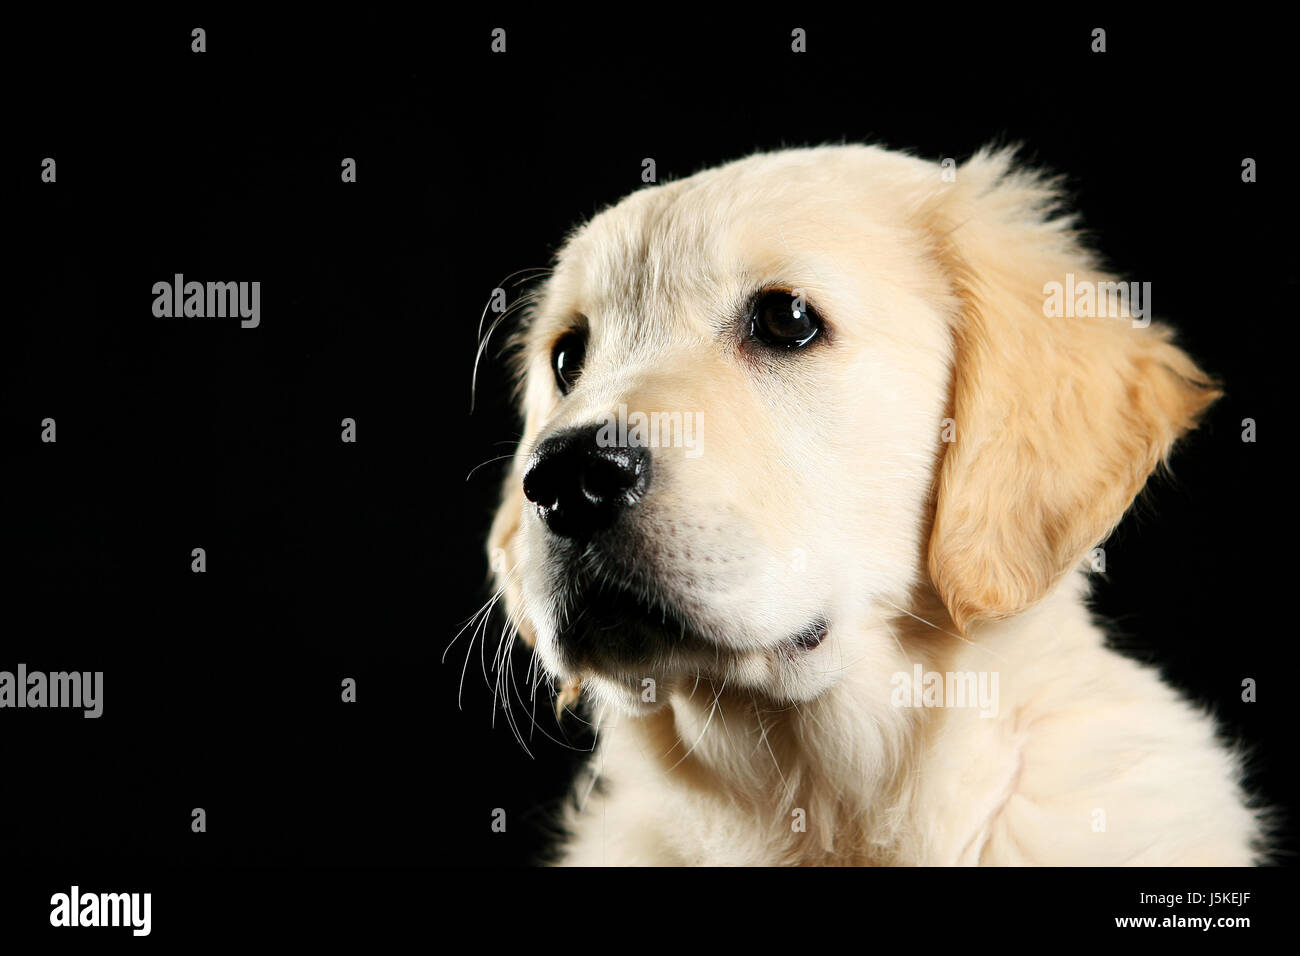 skin,dog,puppy,cute,young,younger,gold,golden retriever,flauschig Stock Photo